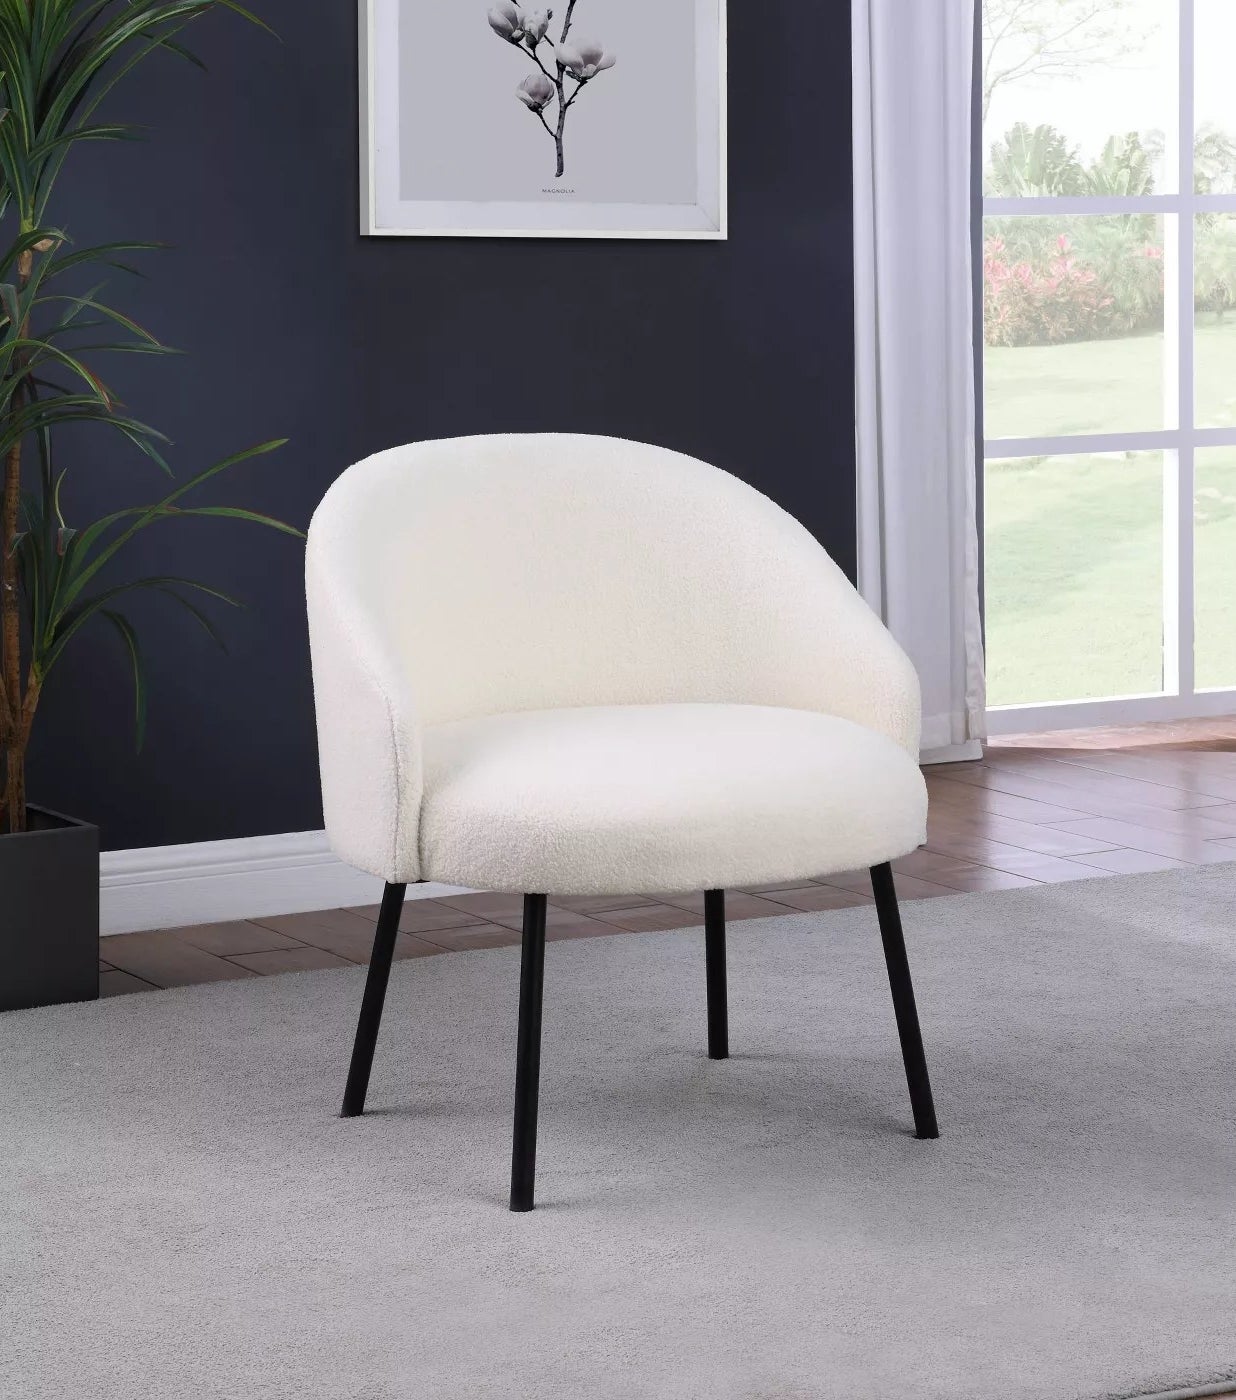 The cream chair with black legs